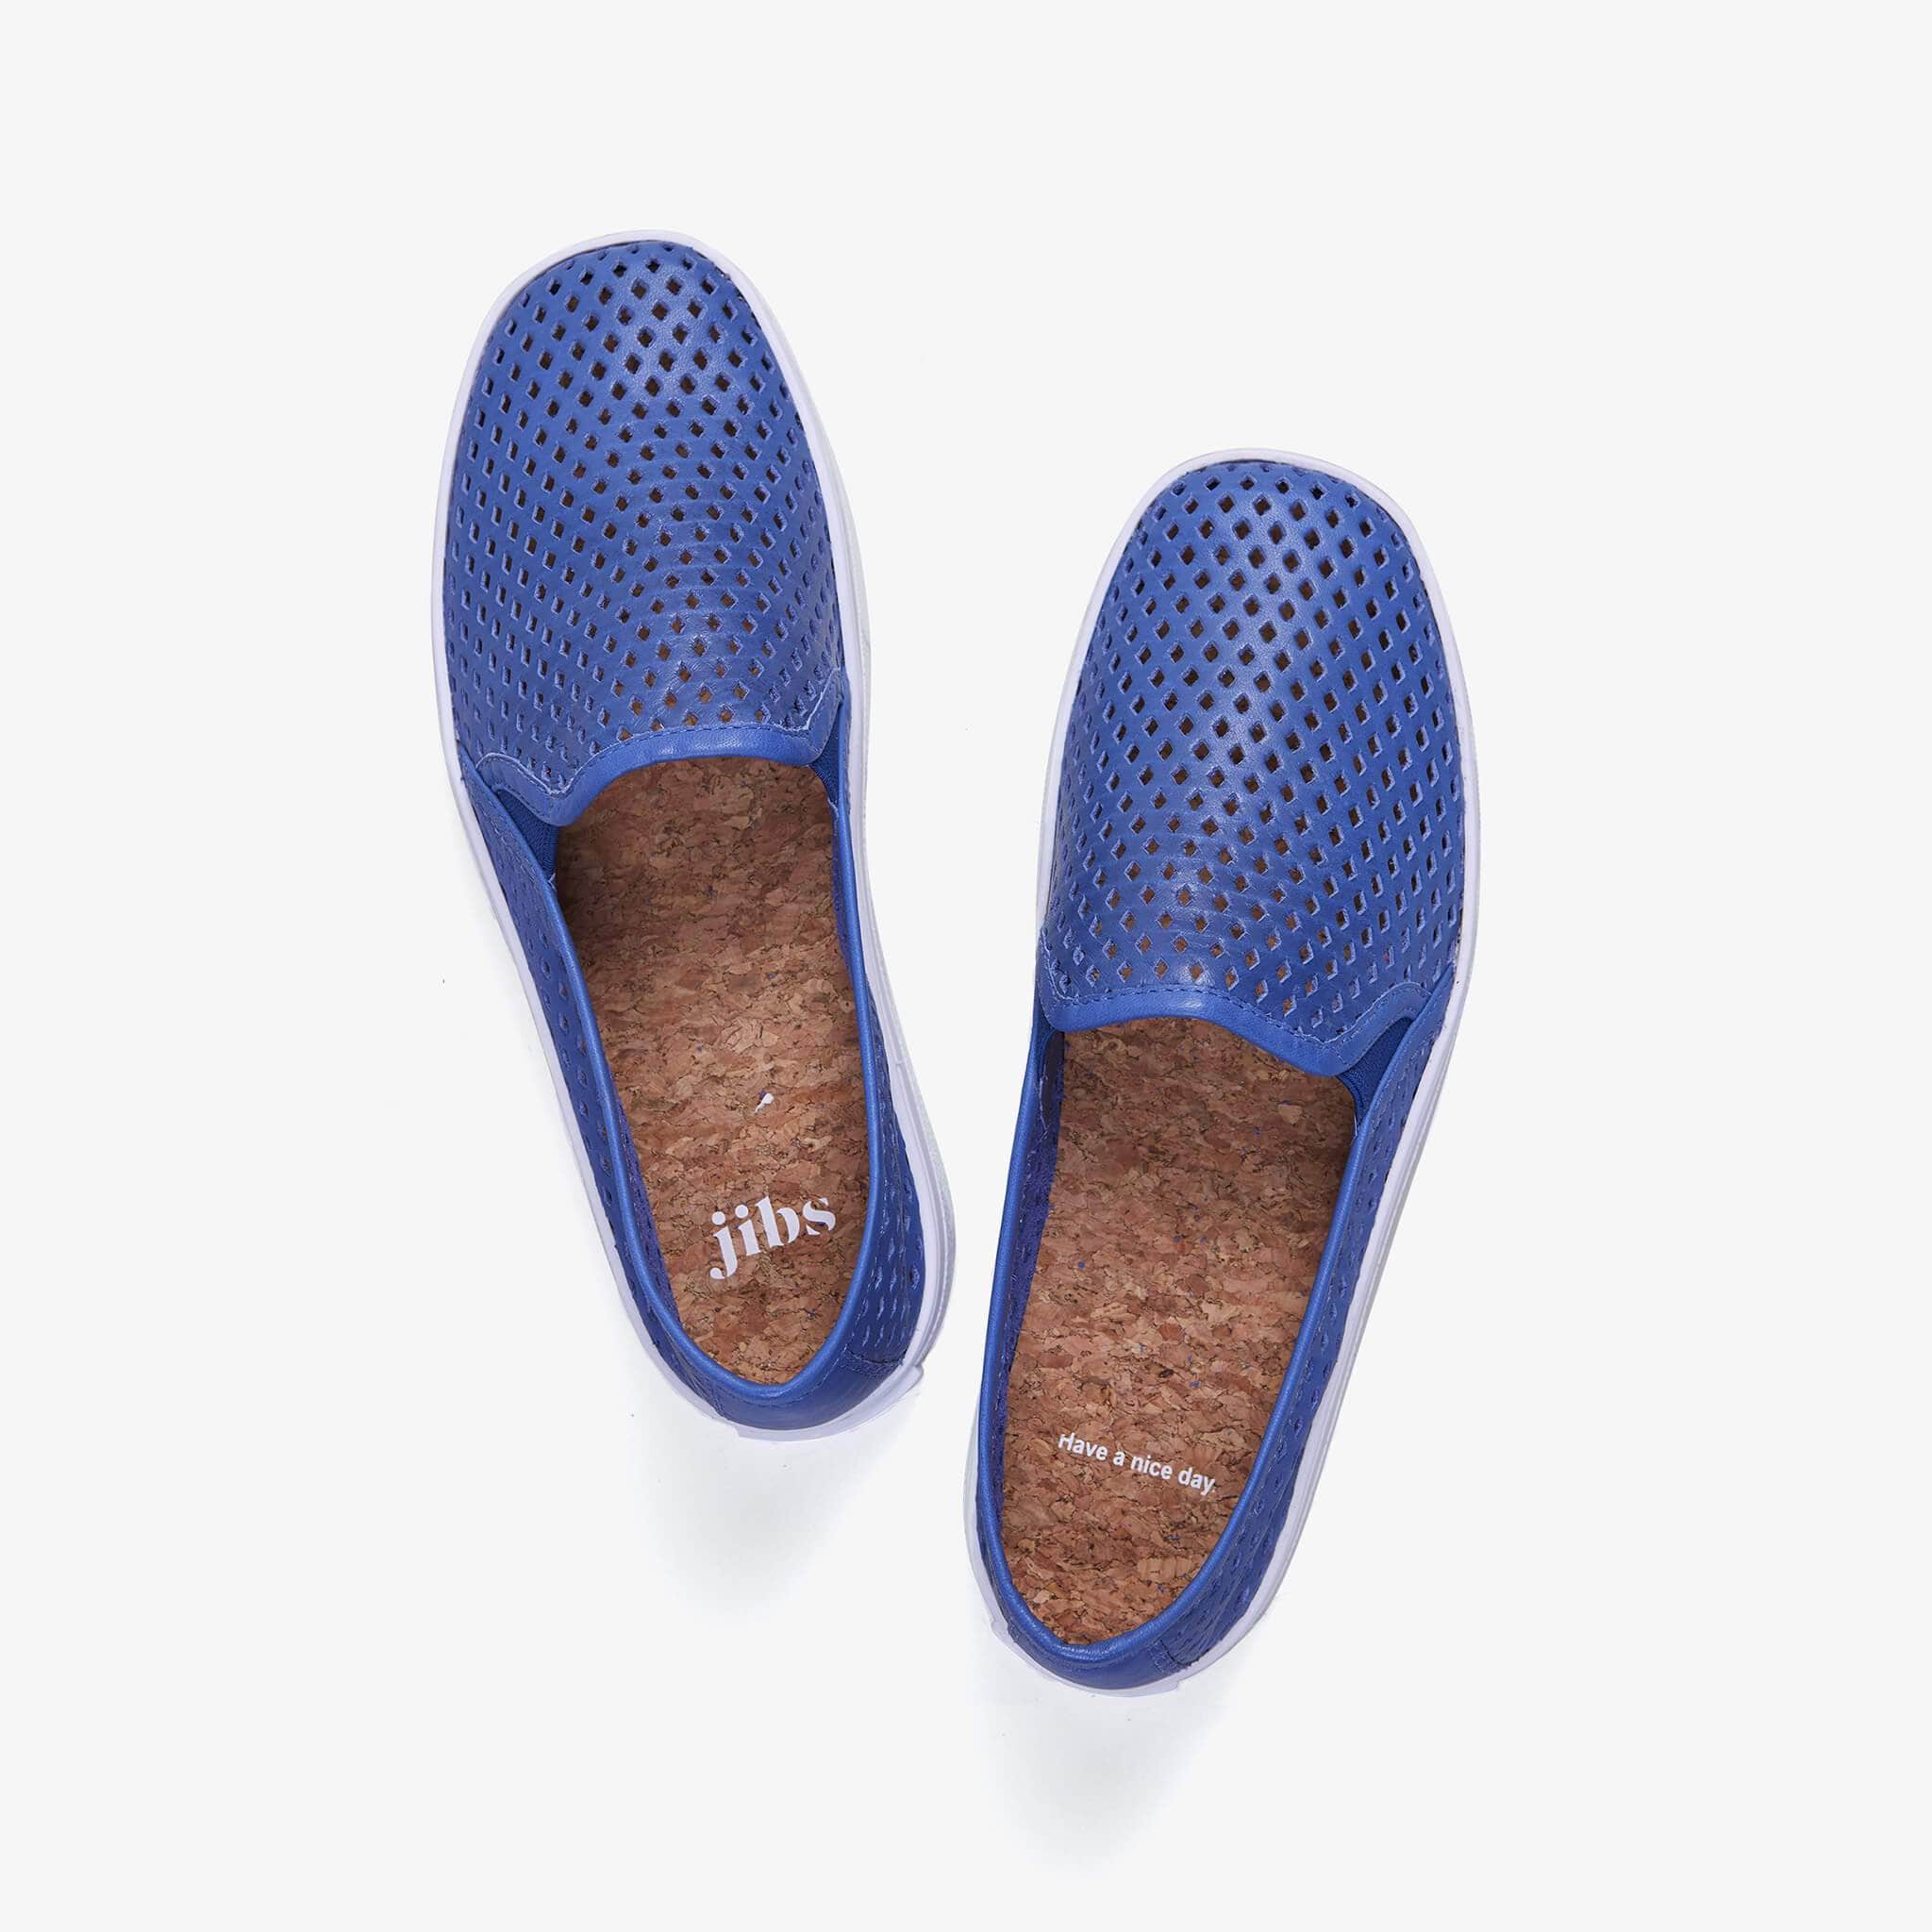 Jibs Classic Galaxy Blue Slip On Sneaker-Shoe Have A Nice Day Cork In-sole